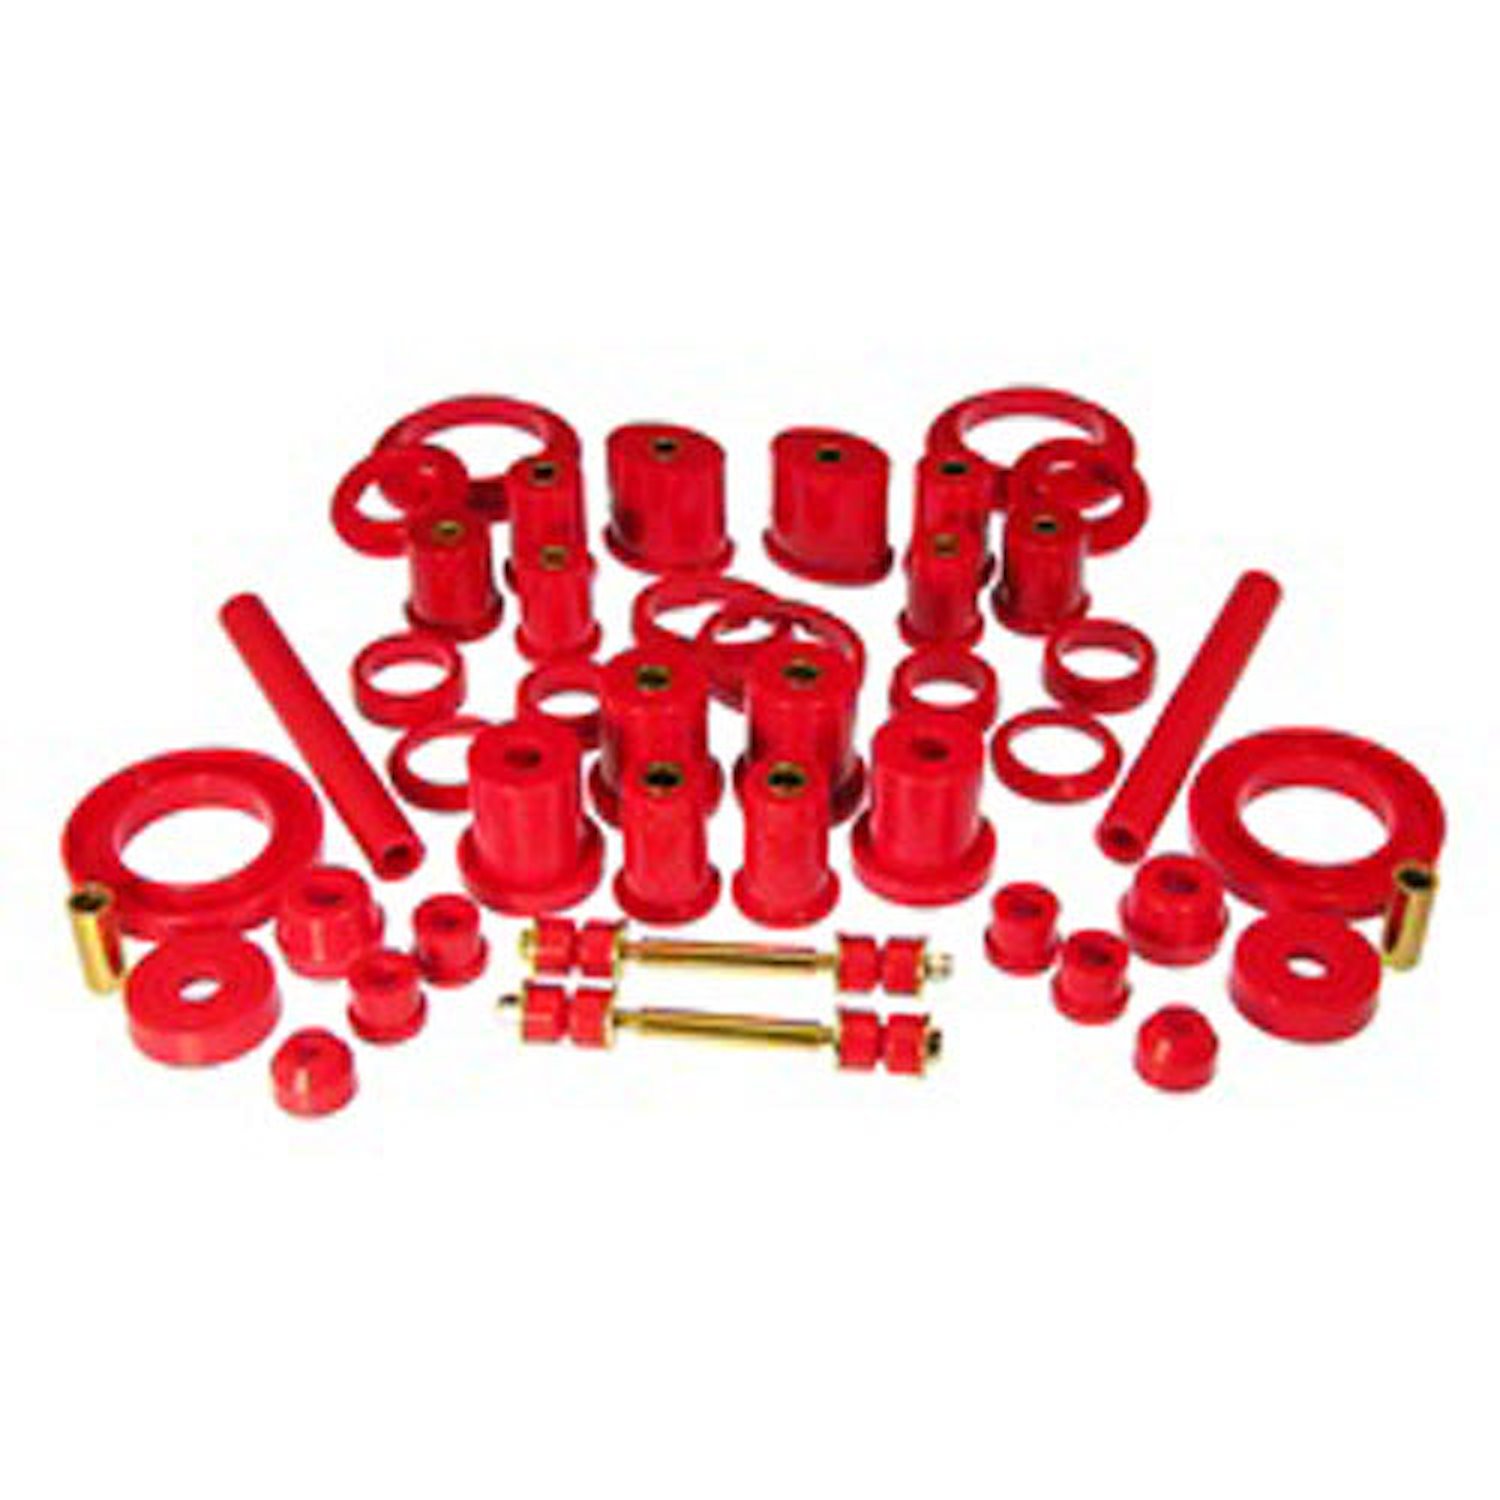 6-2025 Total Bushing Kit for 1999-2004 Ford Mustang [Red]